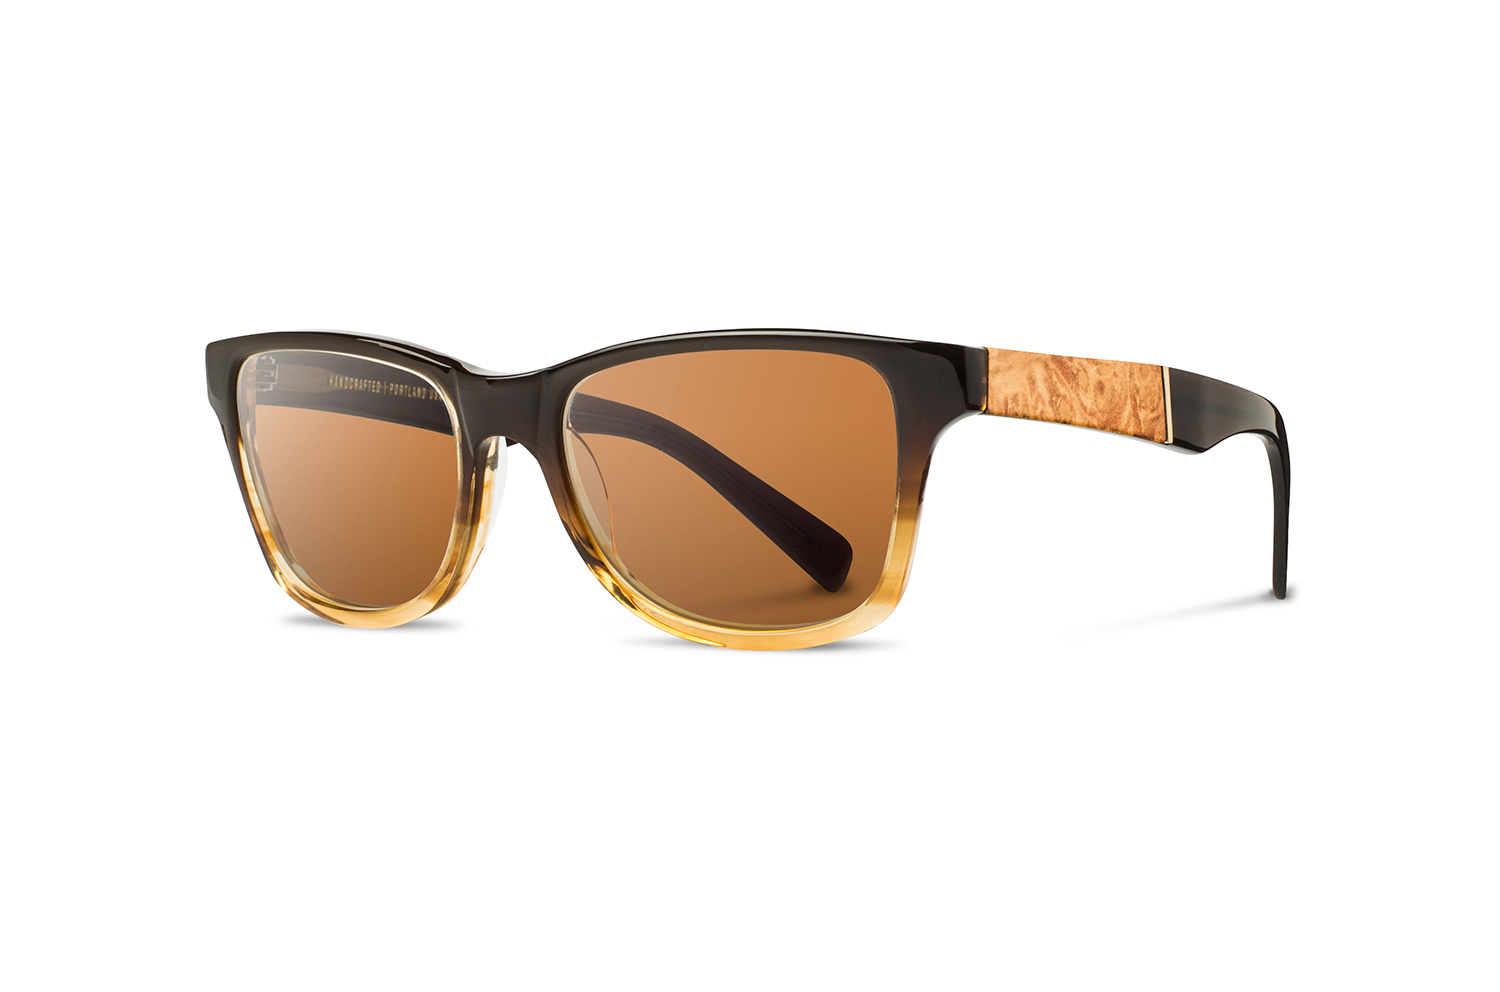 proudly made in america canby acetate sweettea mapleburl brown polarized